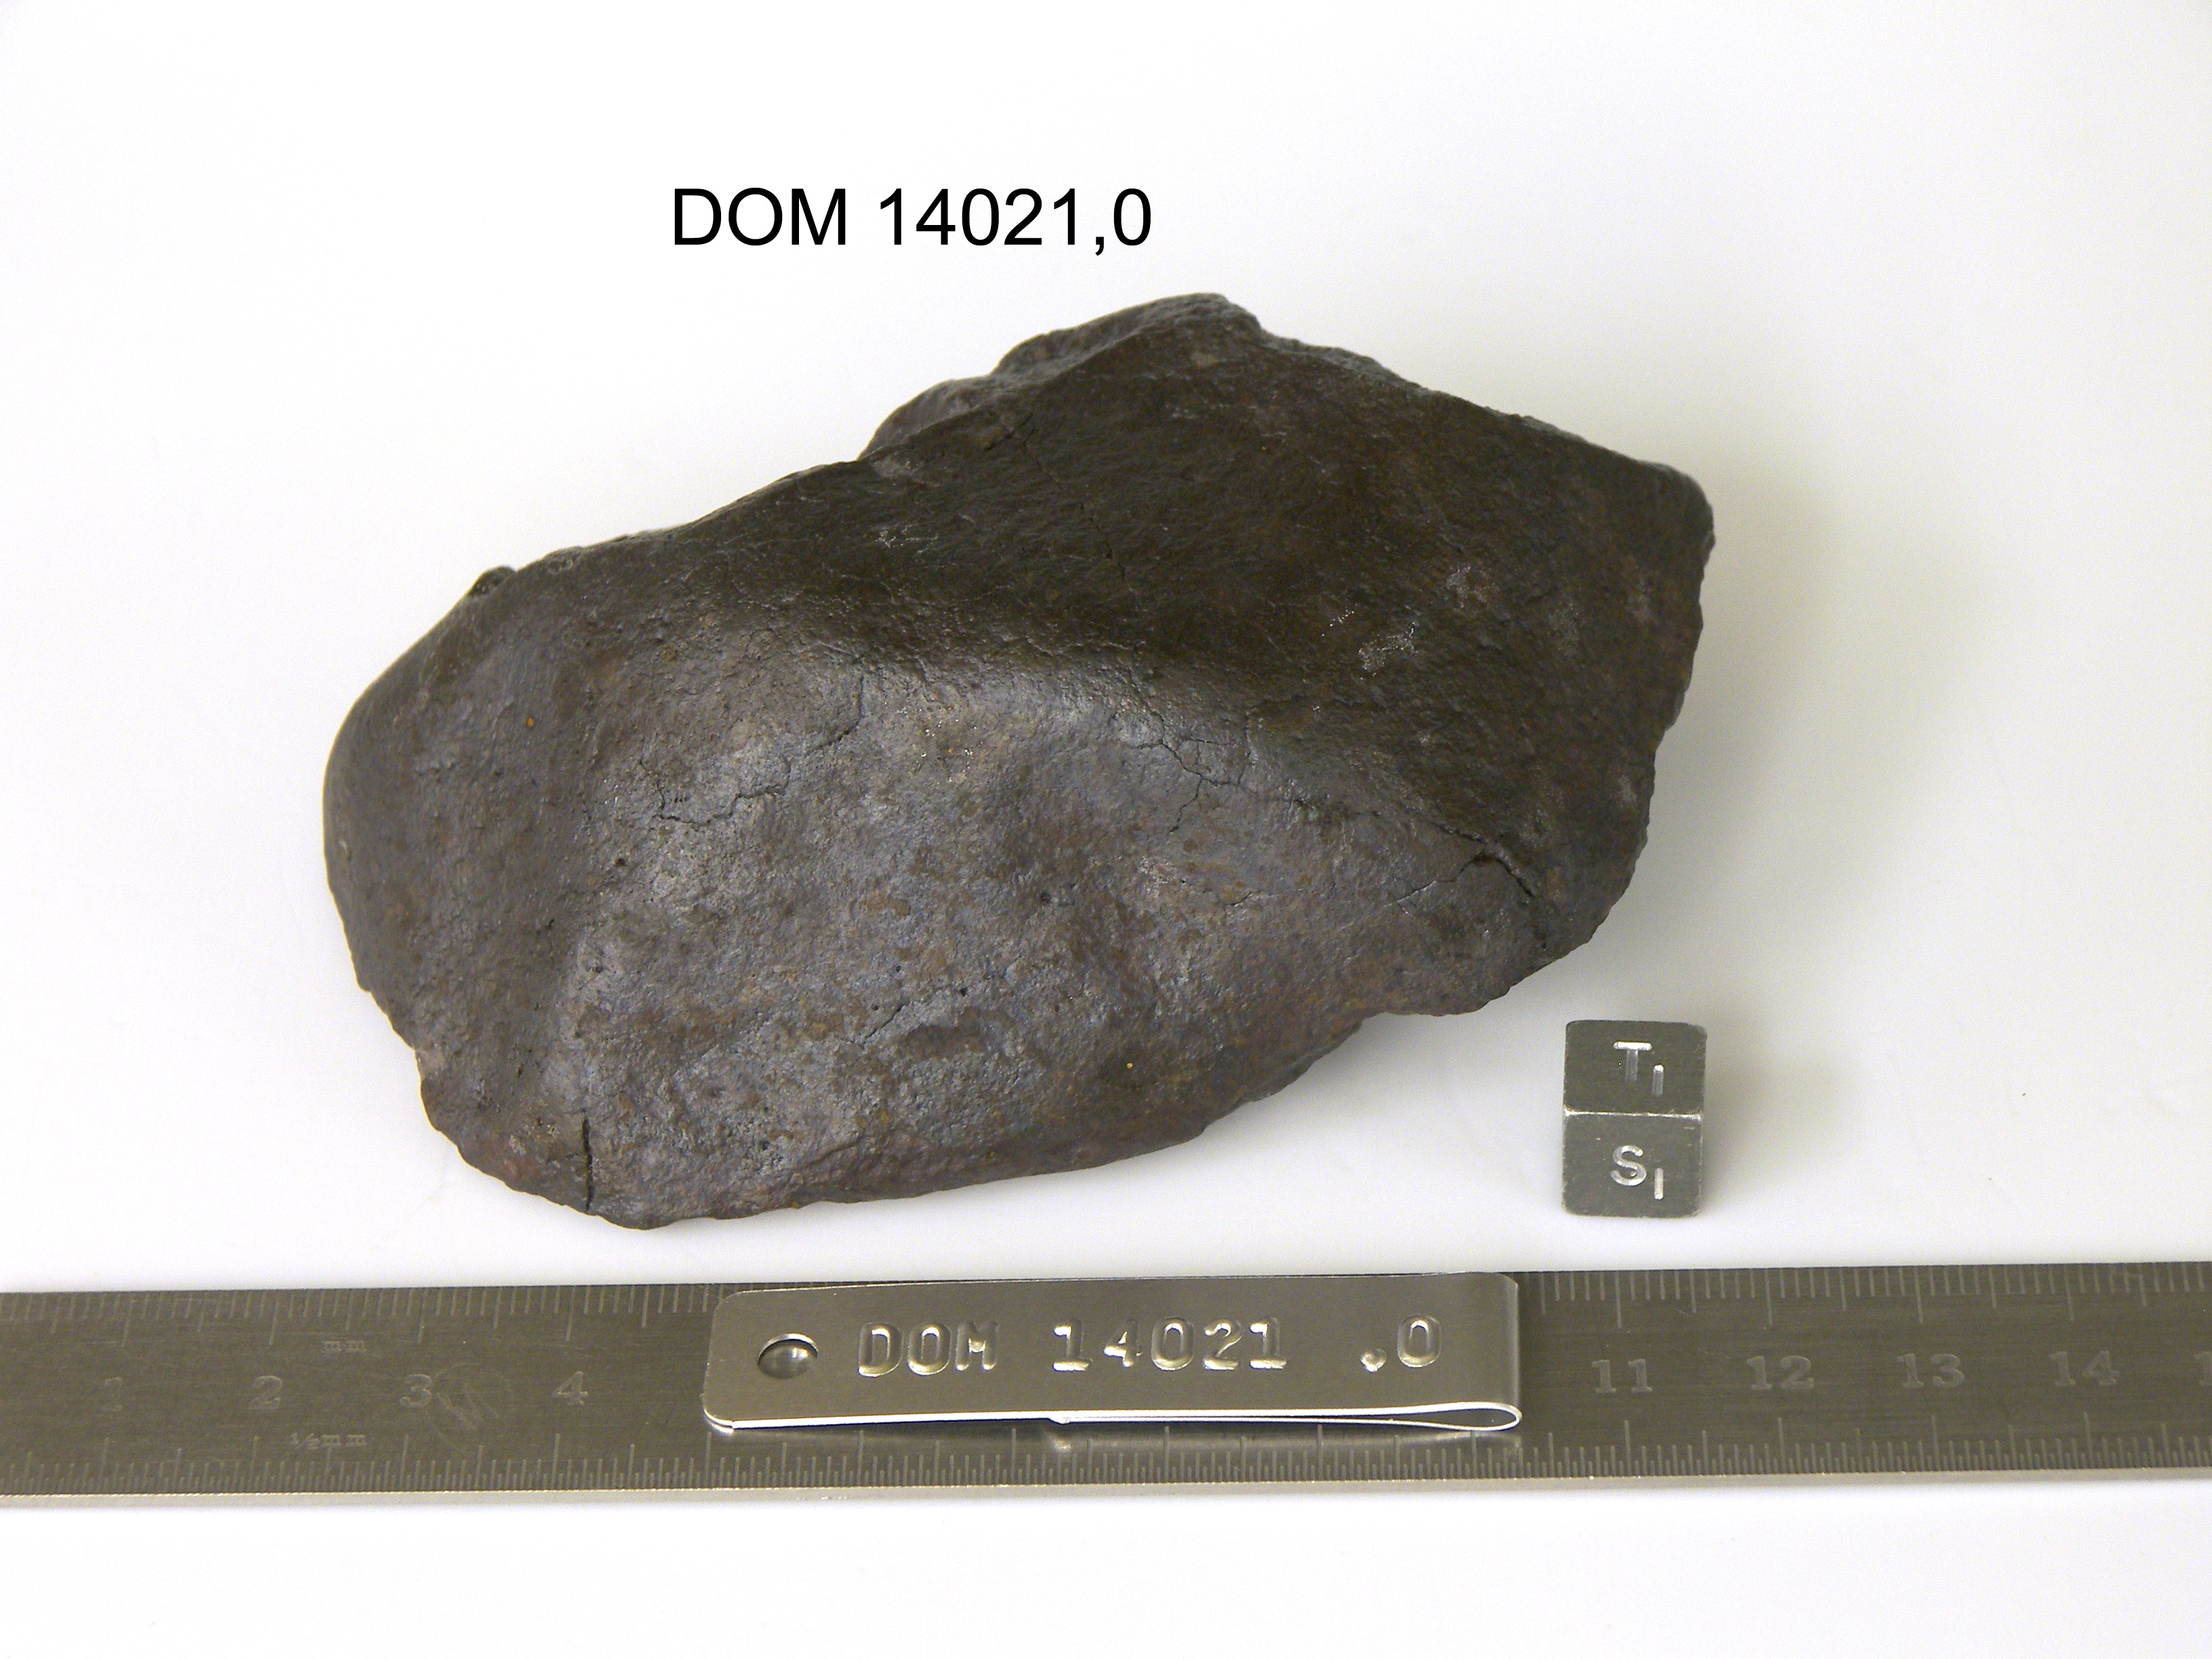 Lab Photo of Sample DOM 14021 Displaying Top Orientation